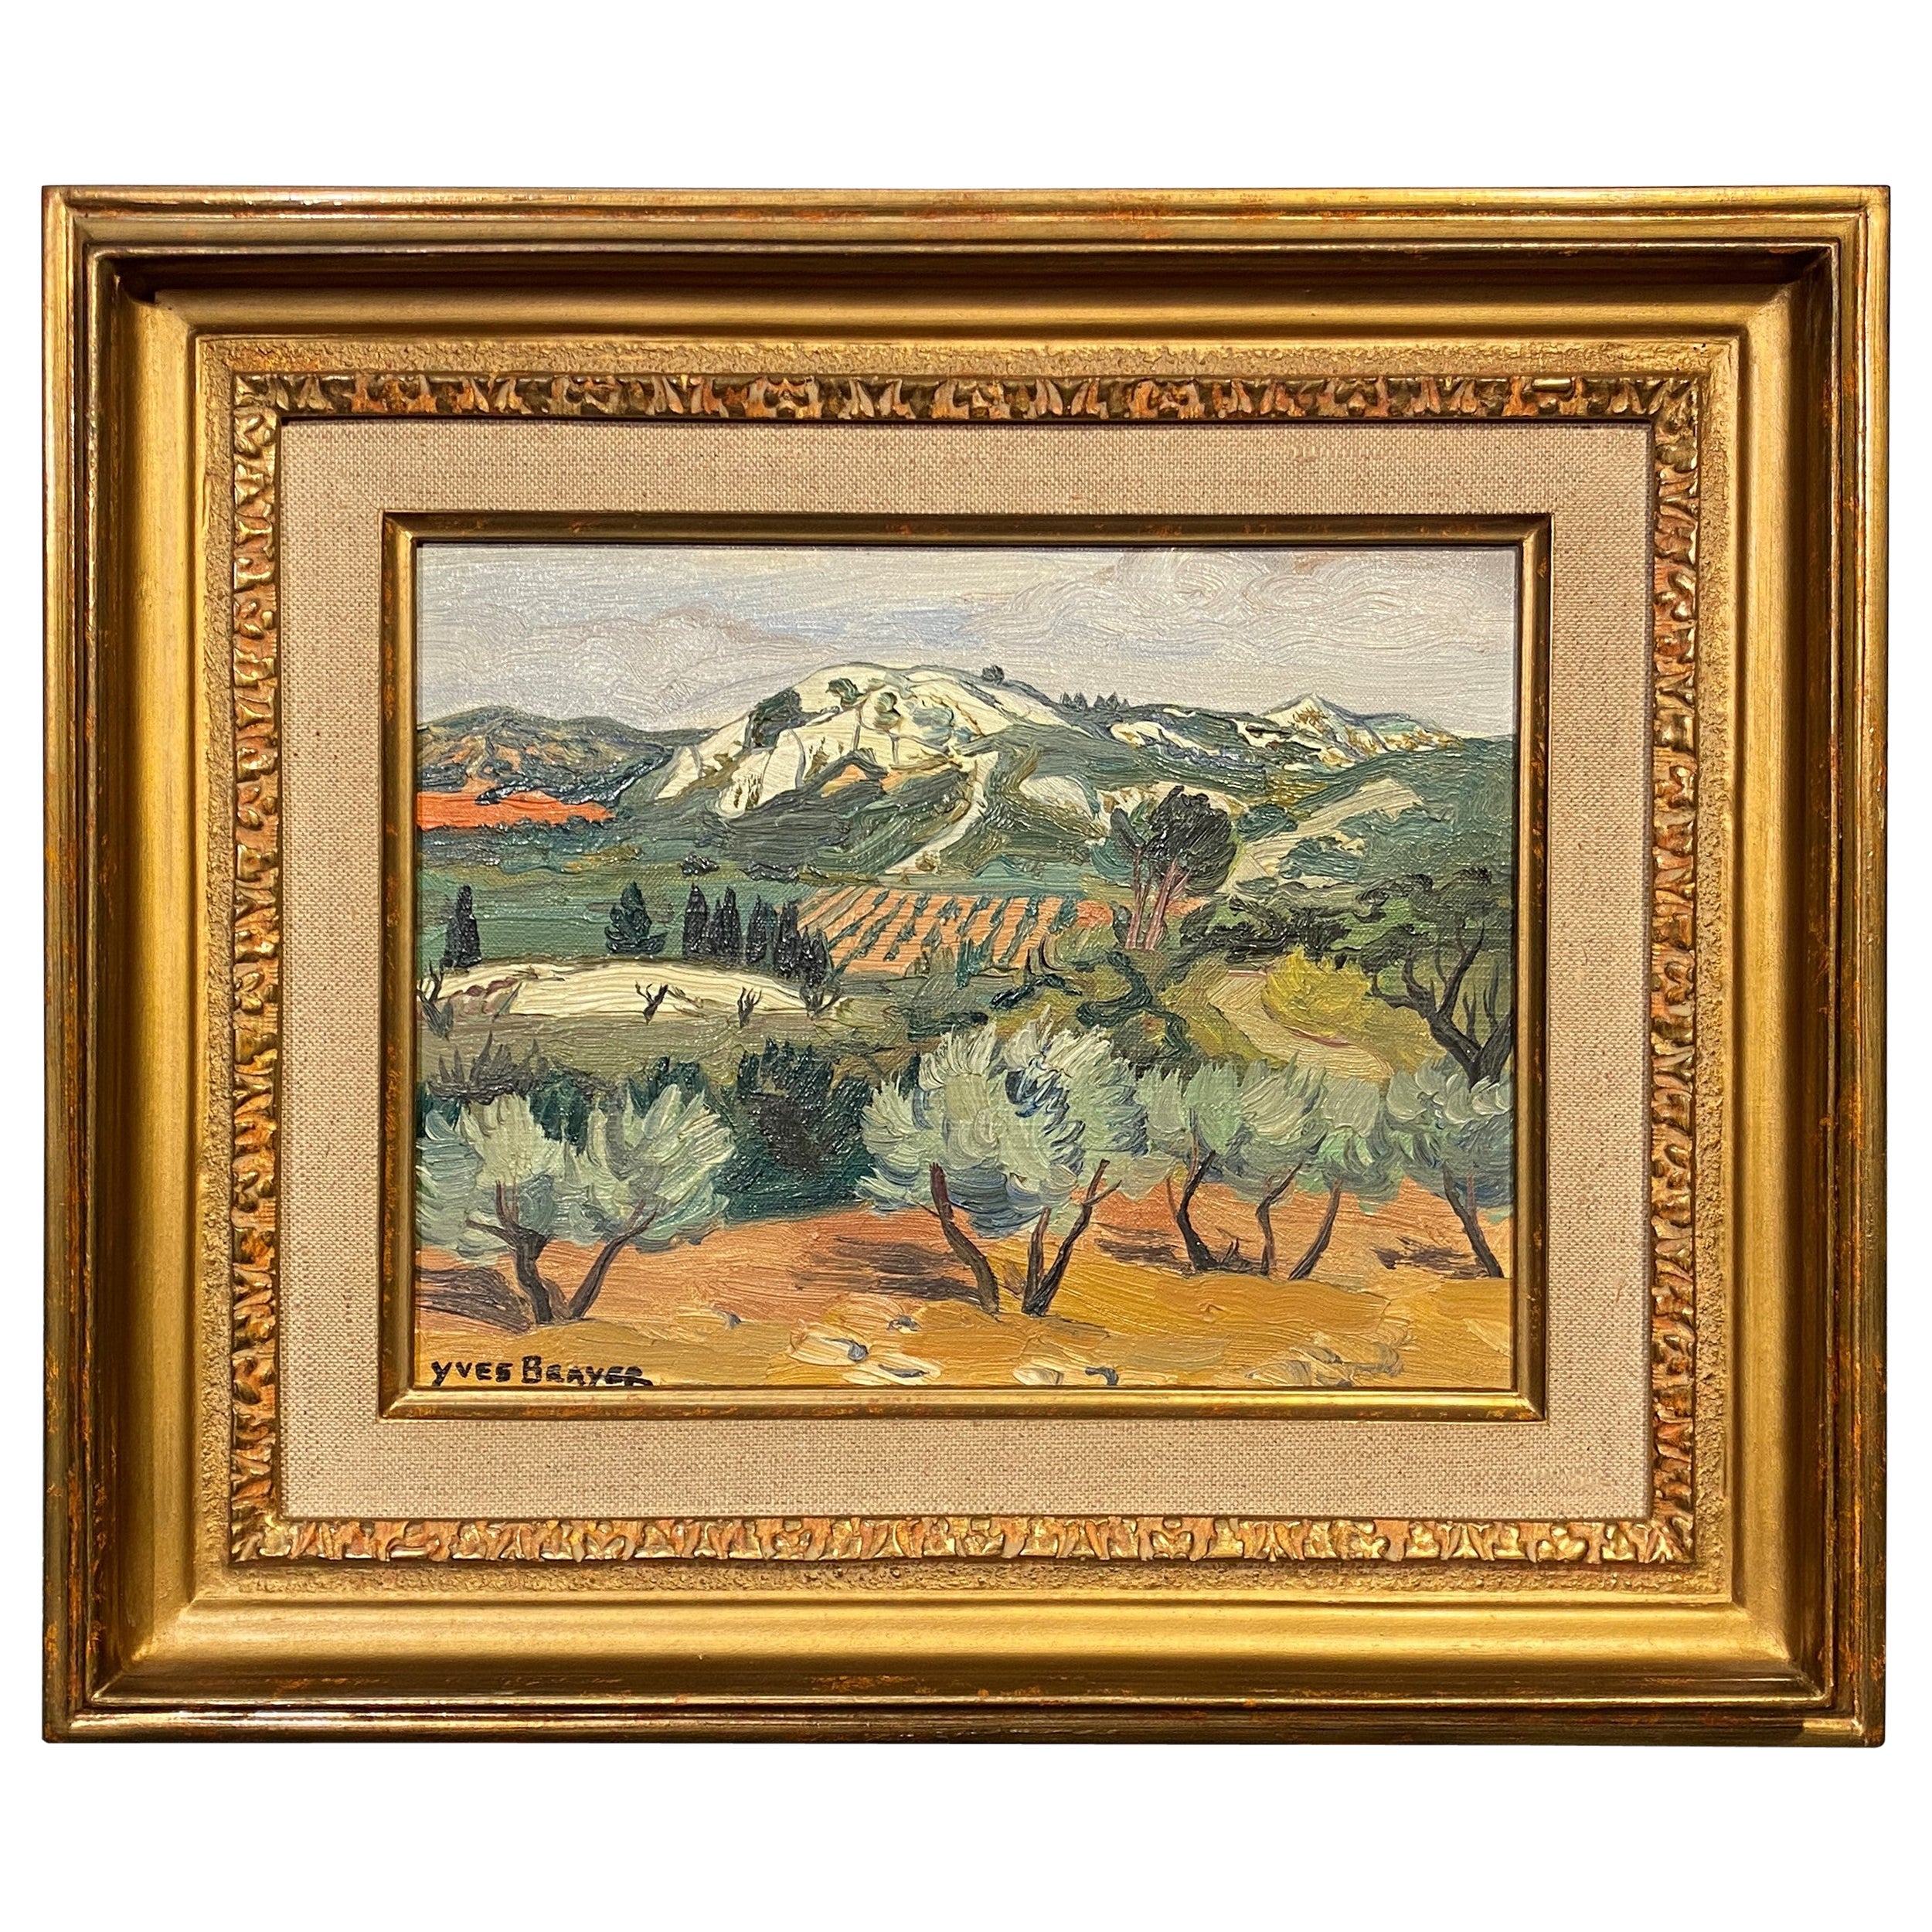 Oil Painting on Canvas by Yves BRAYER "The olive trees in the Alpilles"